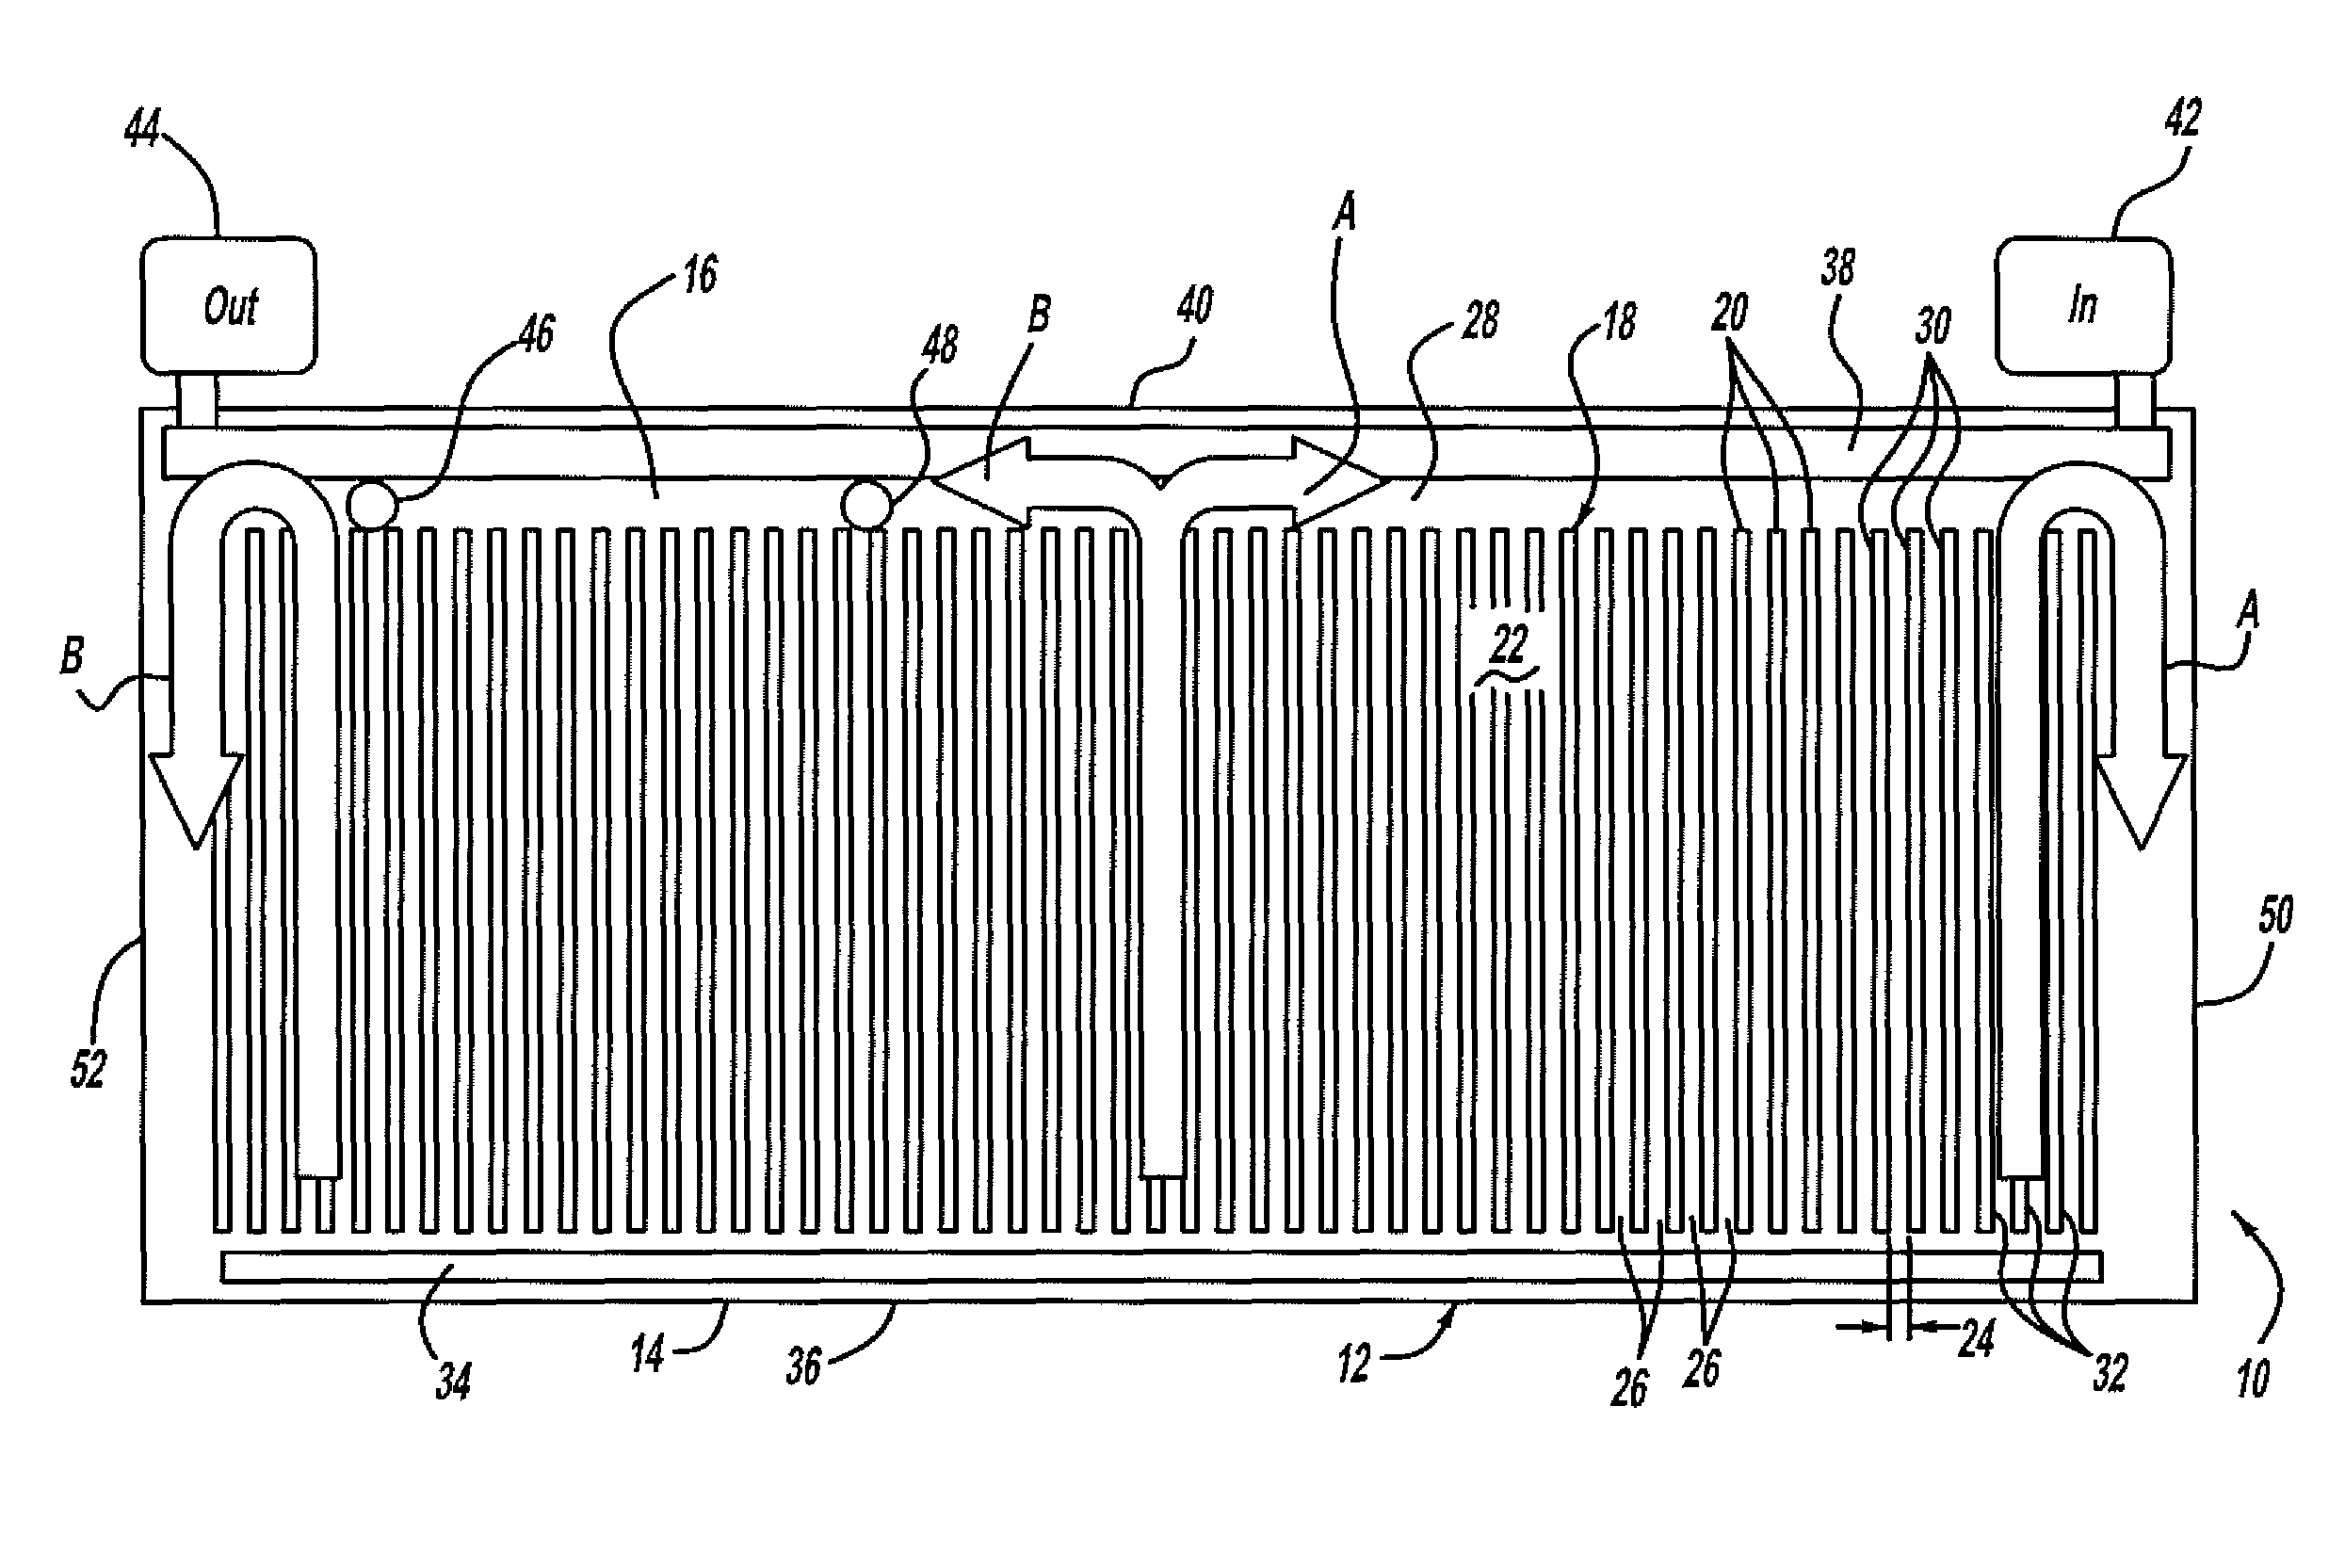 Lithium ion battery cooling system comprising dielectric fluid